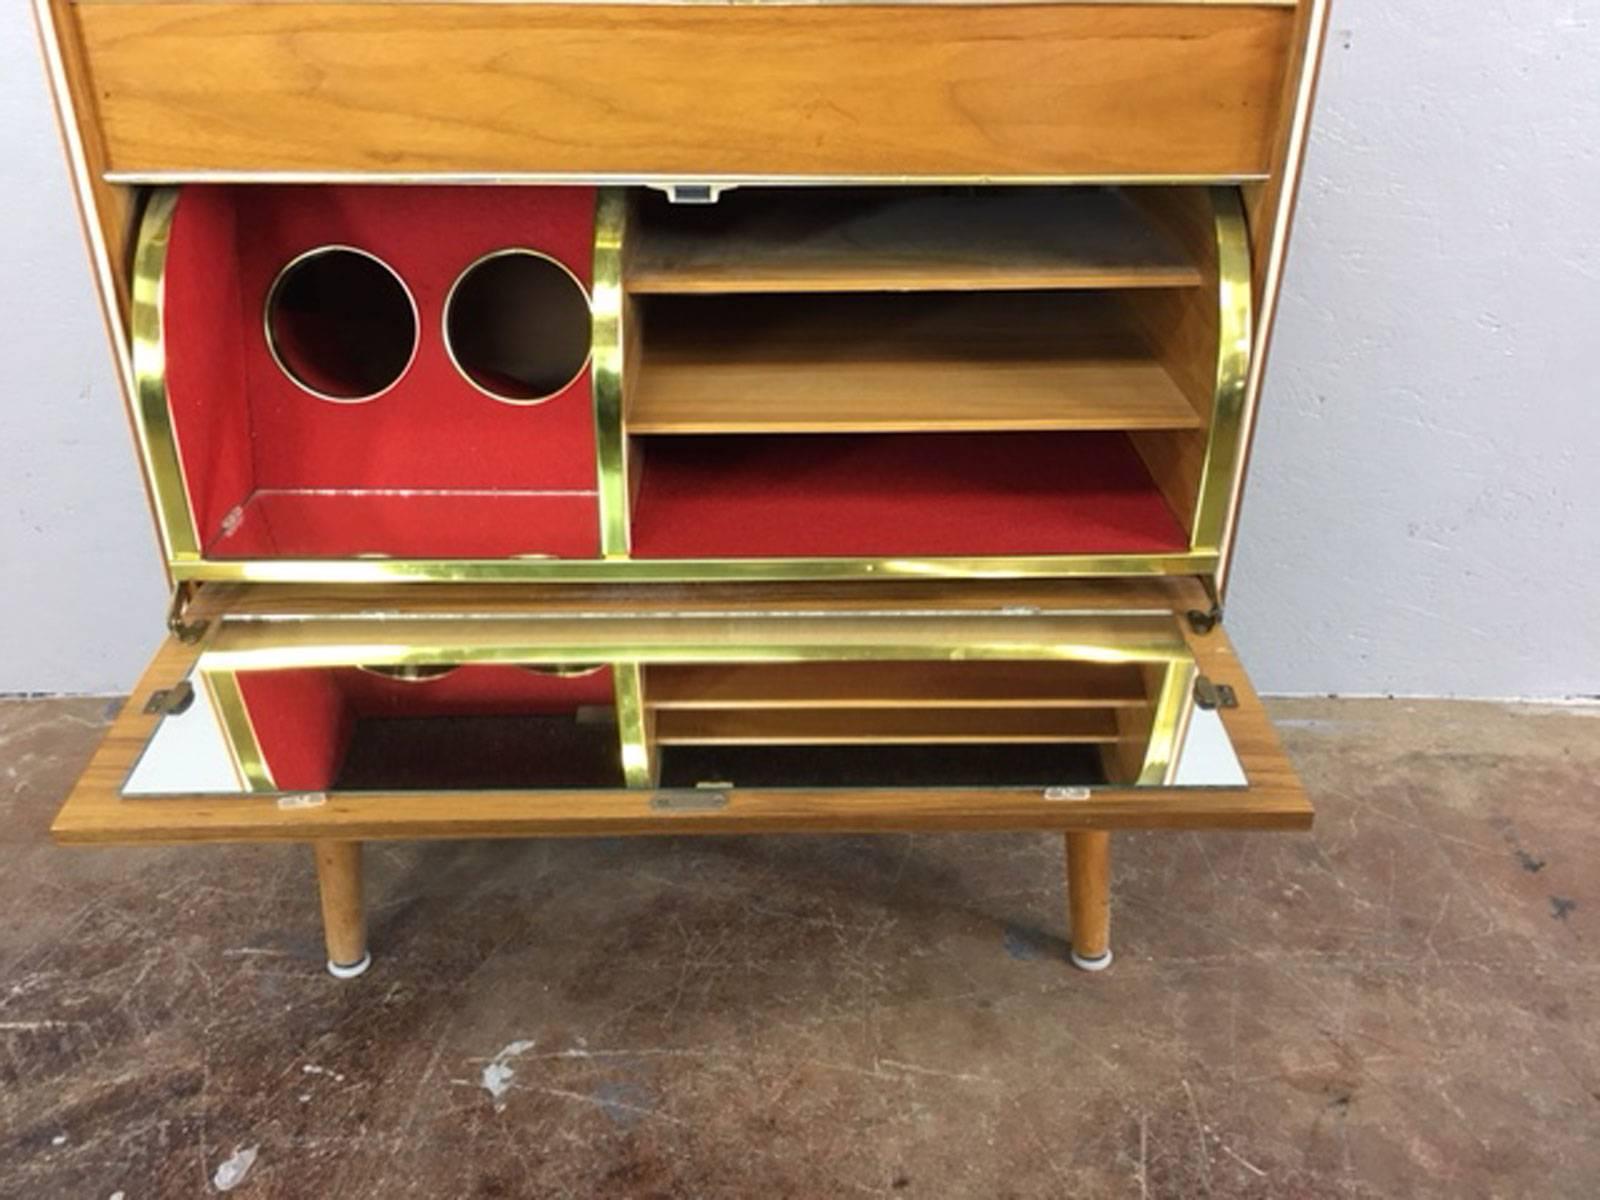 Unique stereo cabinet with built in dry bar by Koronette. Stereo and radio are in working condition, circa 1950s.